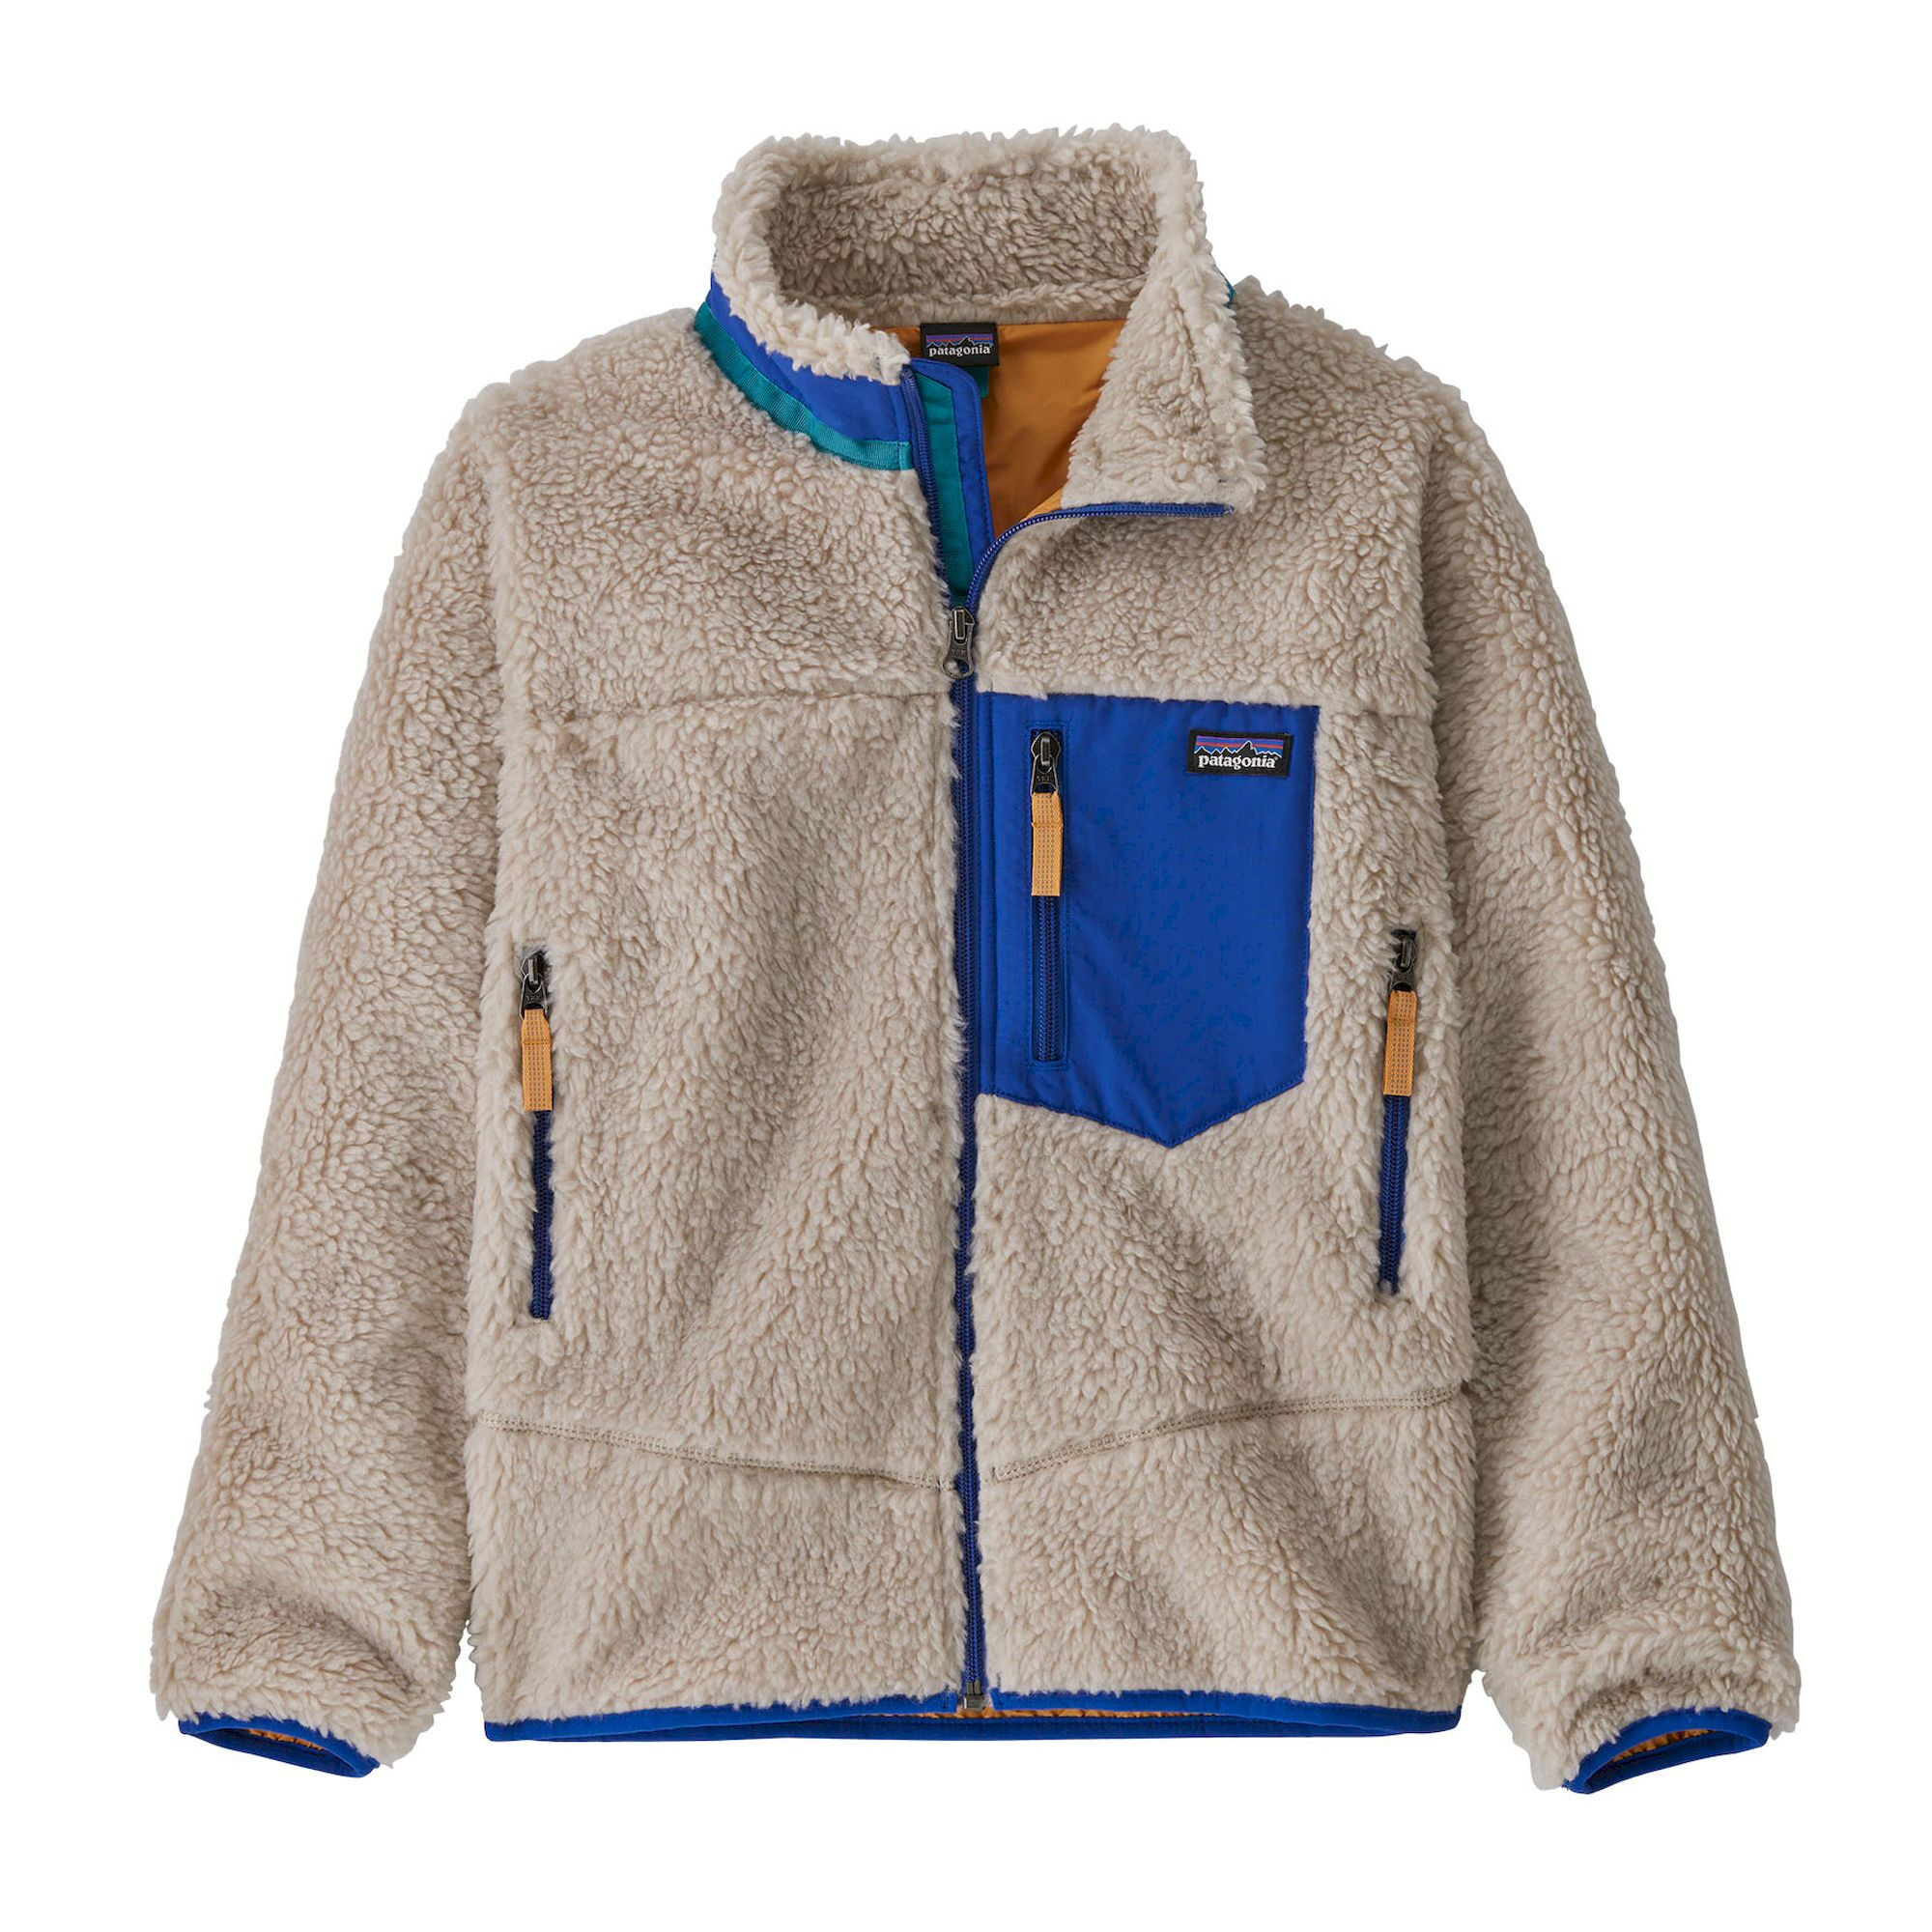 https://images.hardloop.fr/471833/patagonia-k-s-retro-x-jacket-giacca-in-pile-bambino.jpg?w=auto&h=auto&q=80